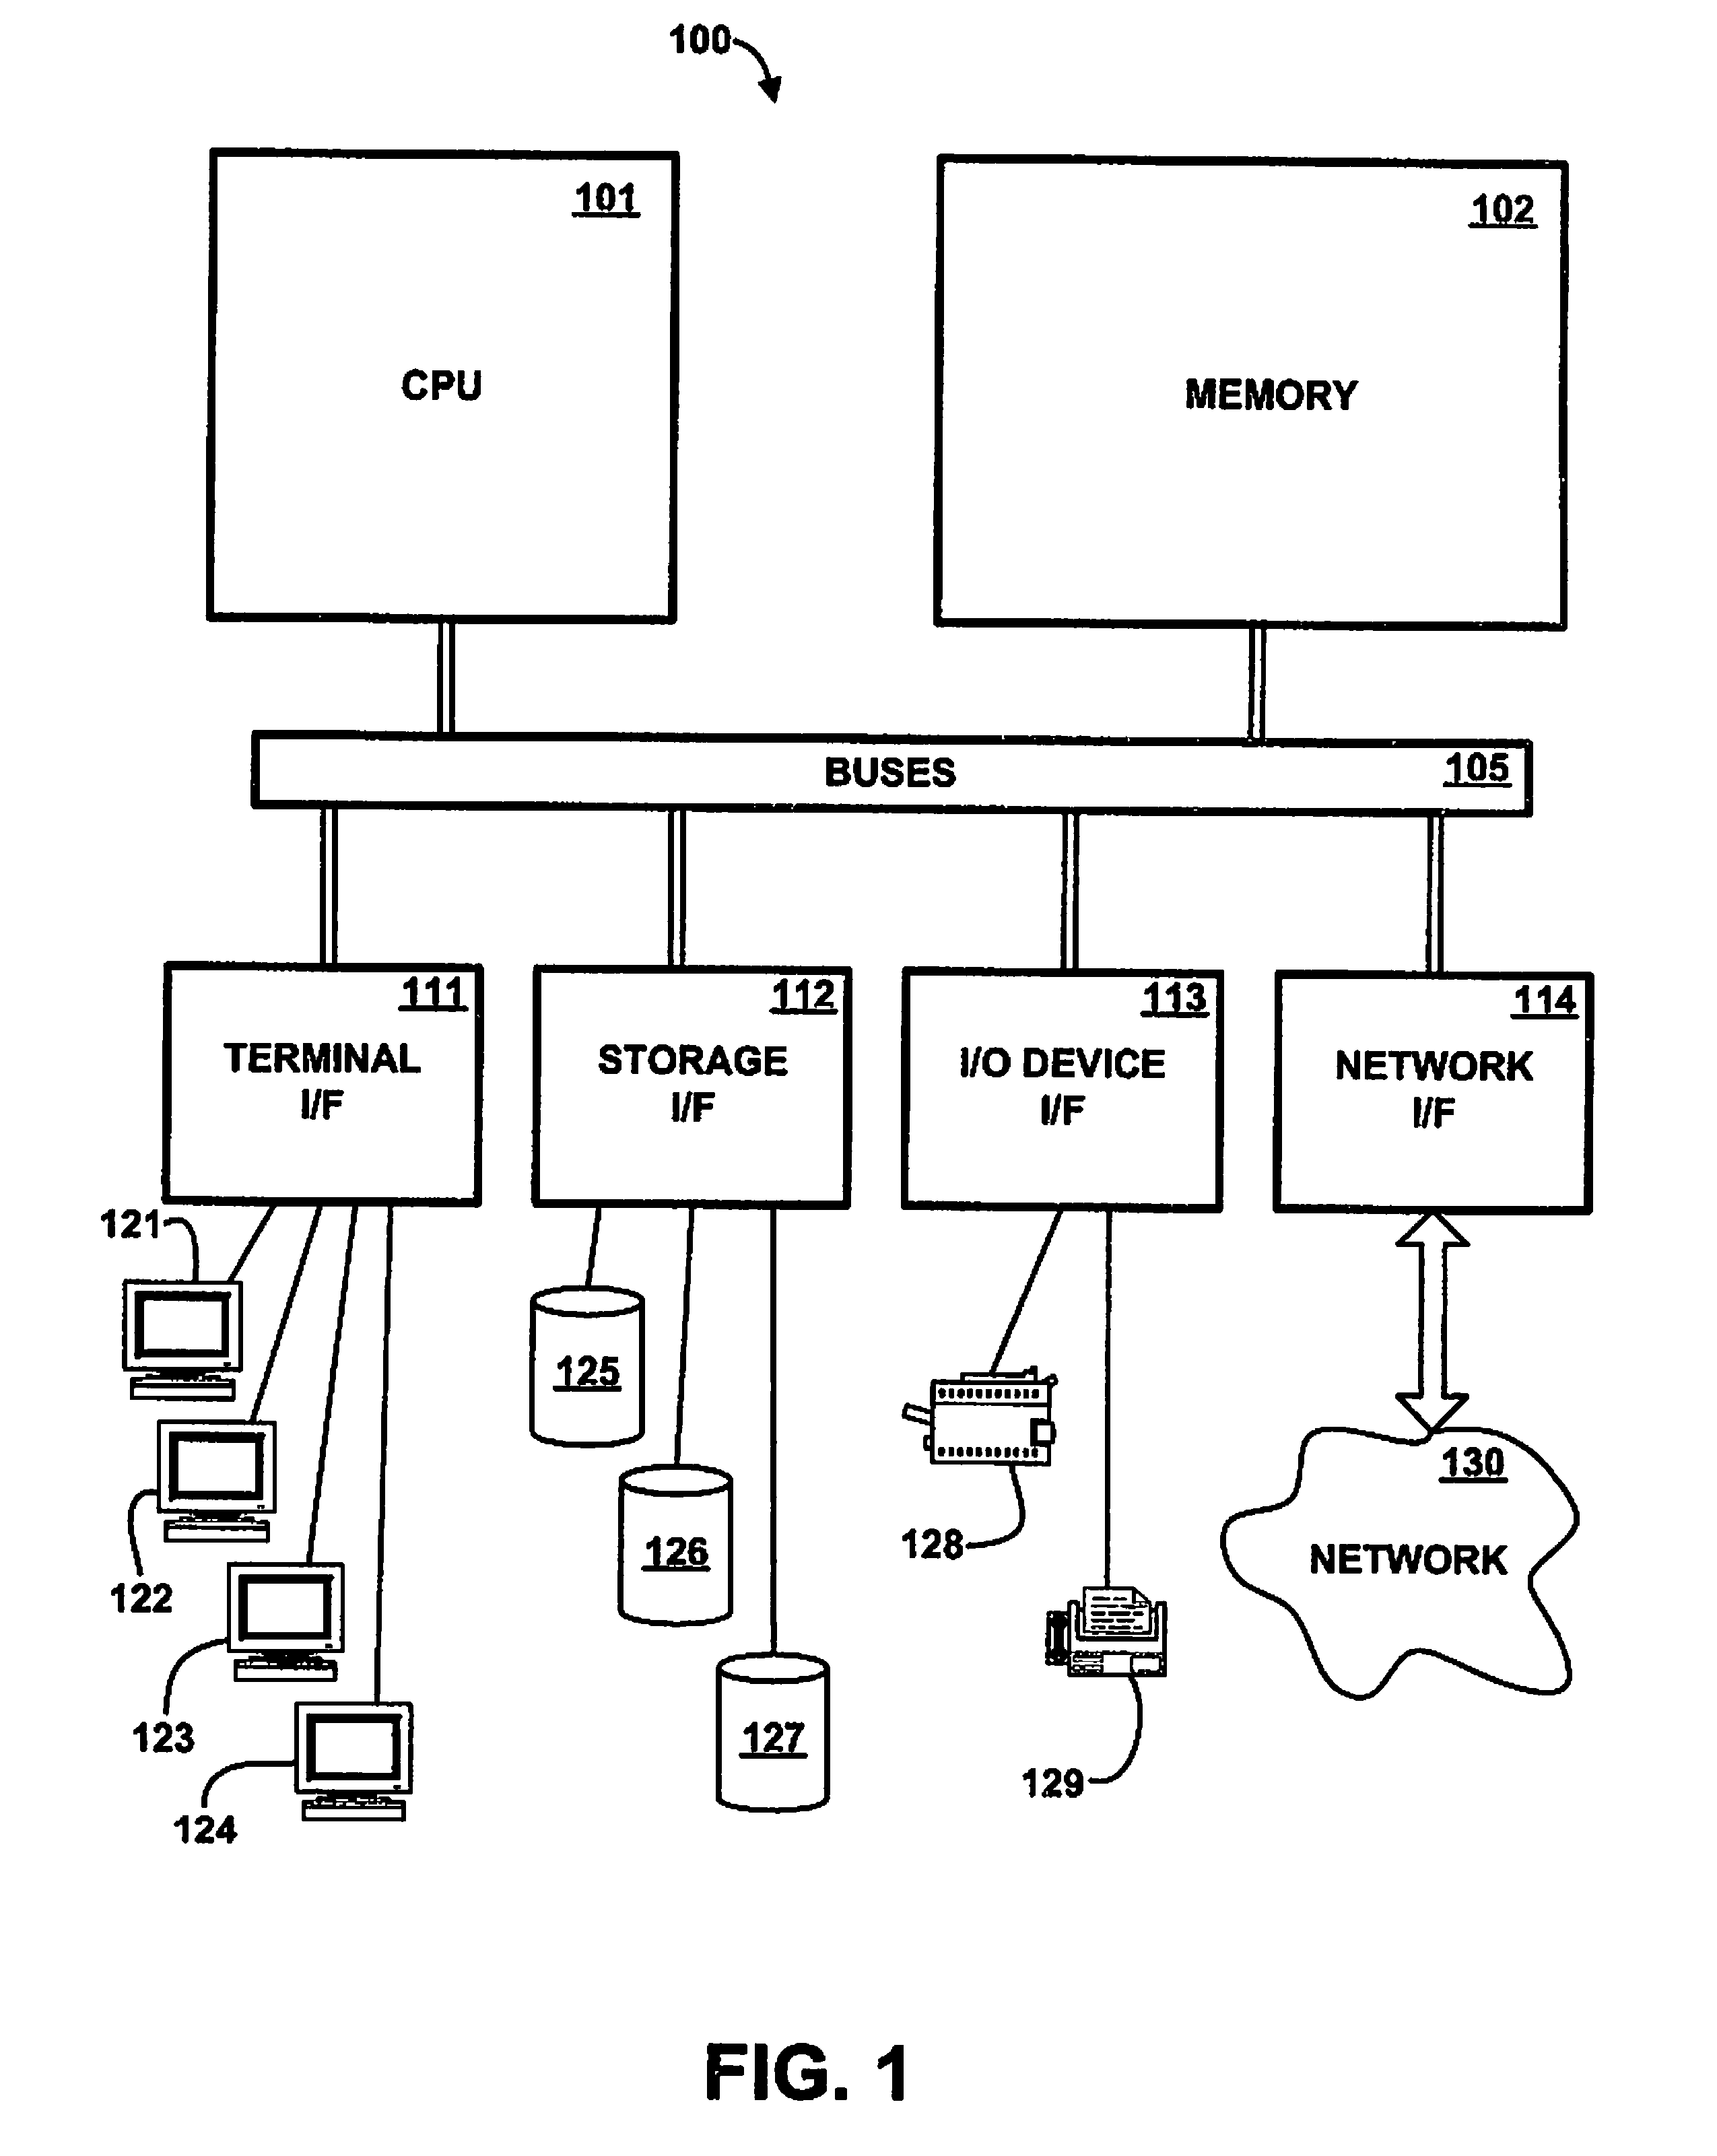 Method and apparatus for re-using memory allocated for data structures used by software processes